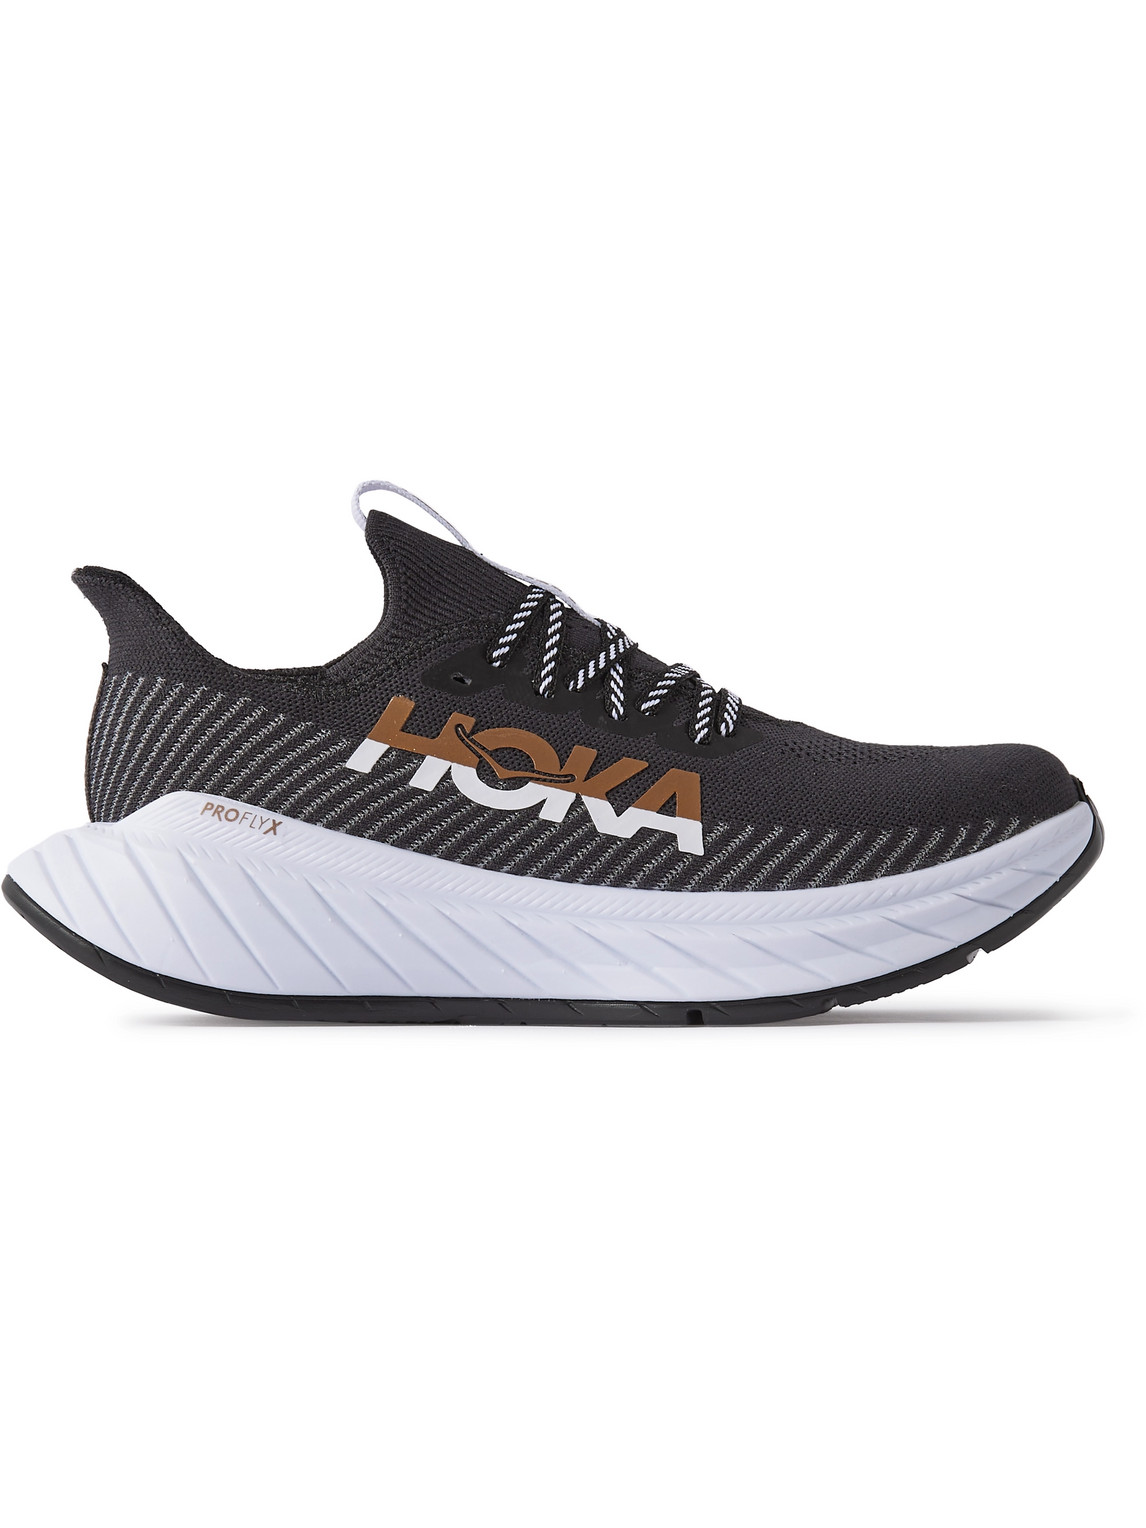 Hoka One One Carbon X3 Rubber-trimmed Mesh Running Sneakers In Black